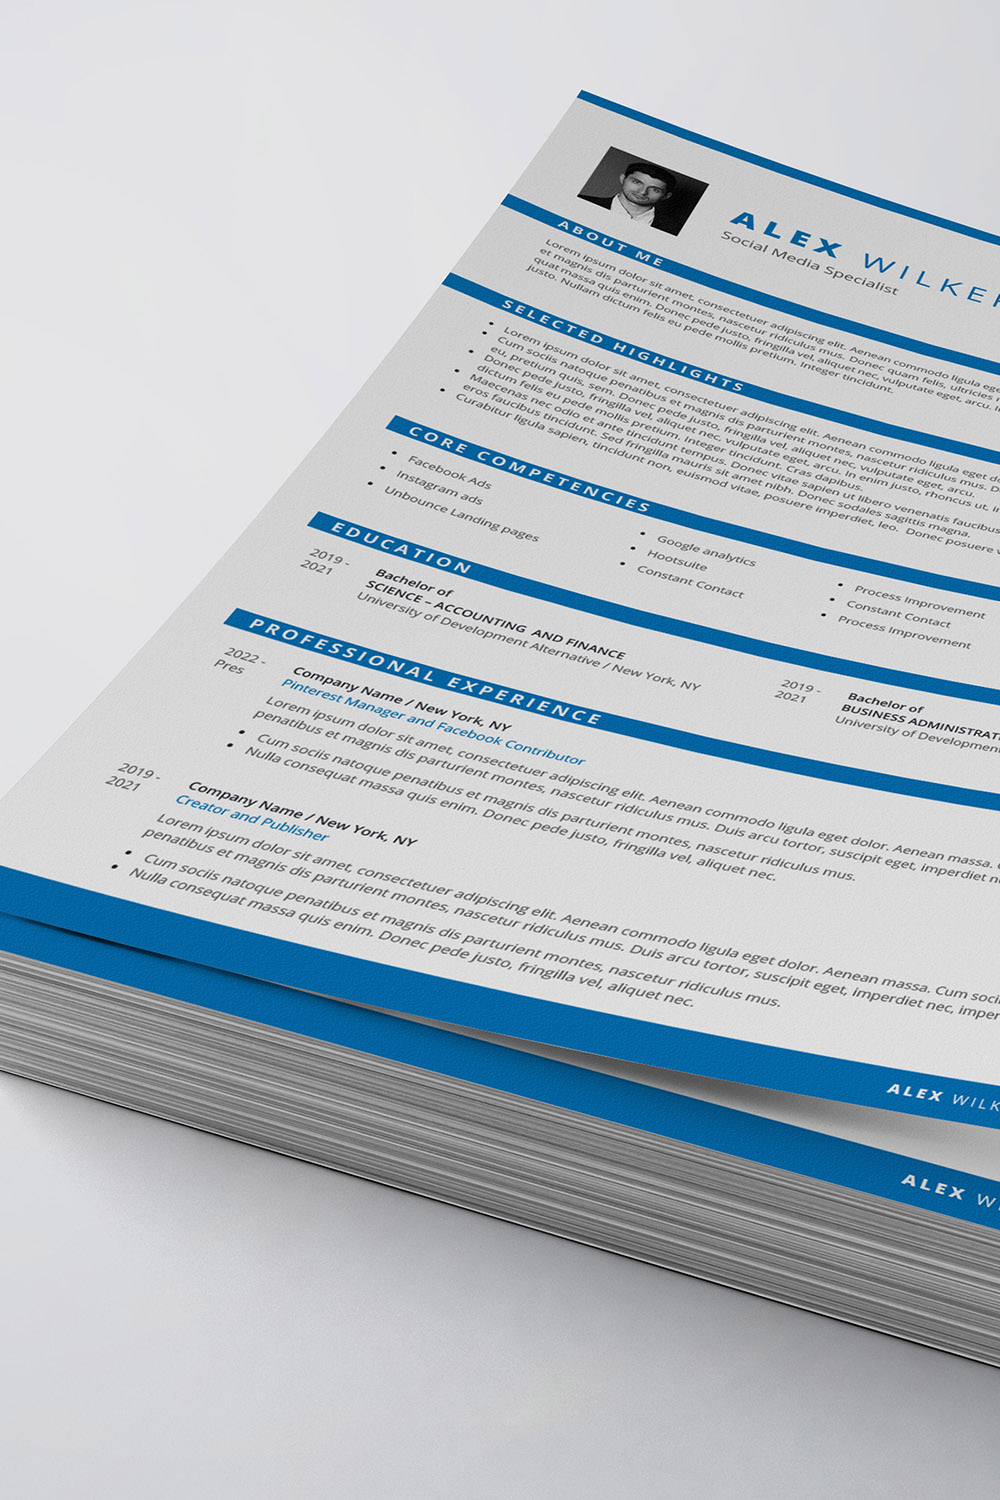 Blue and white resume is stacked on top of each other.